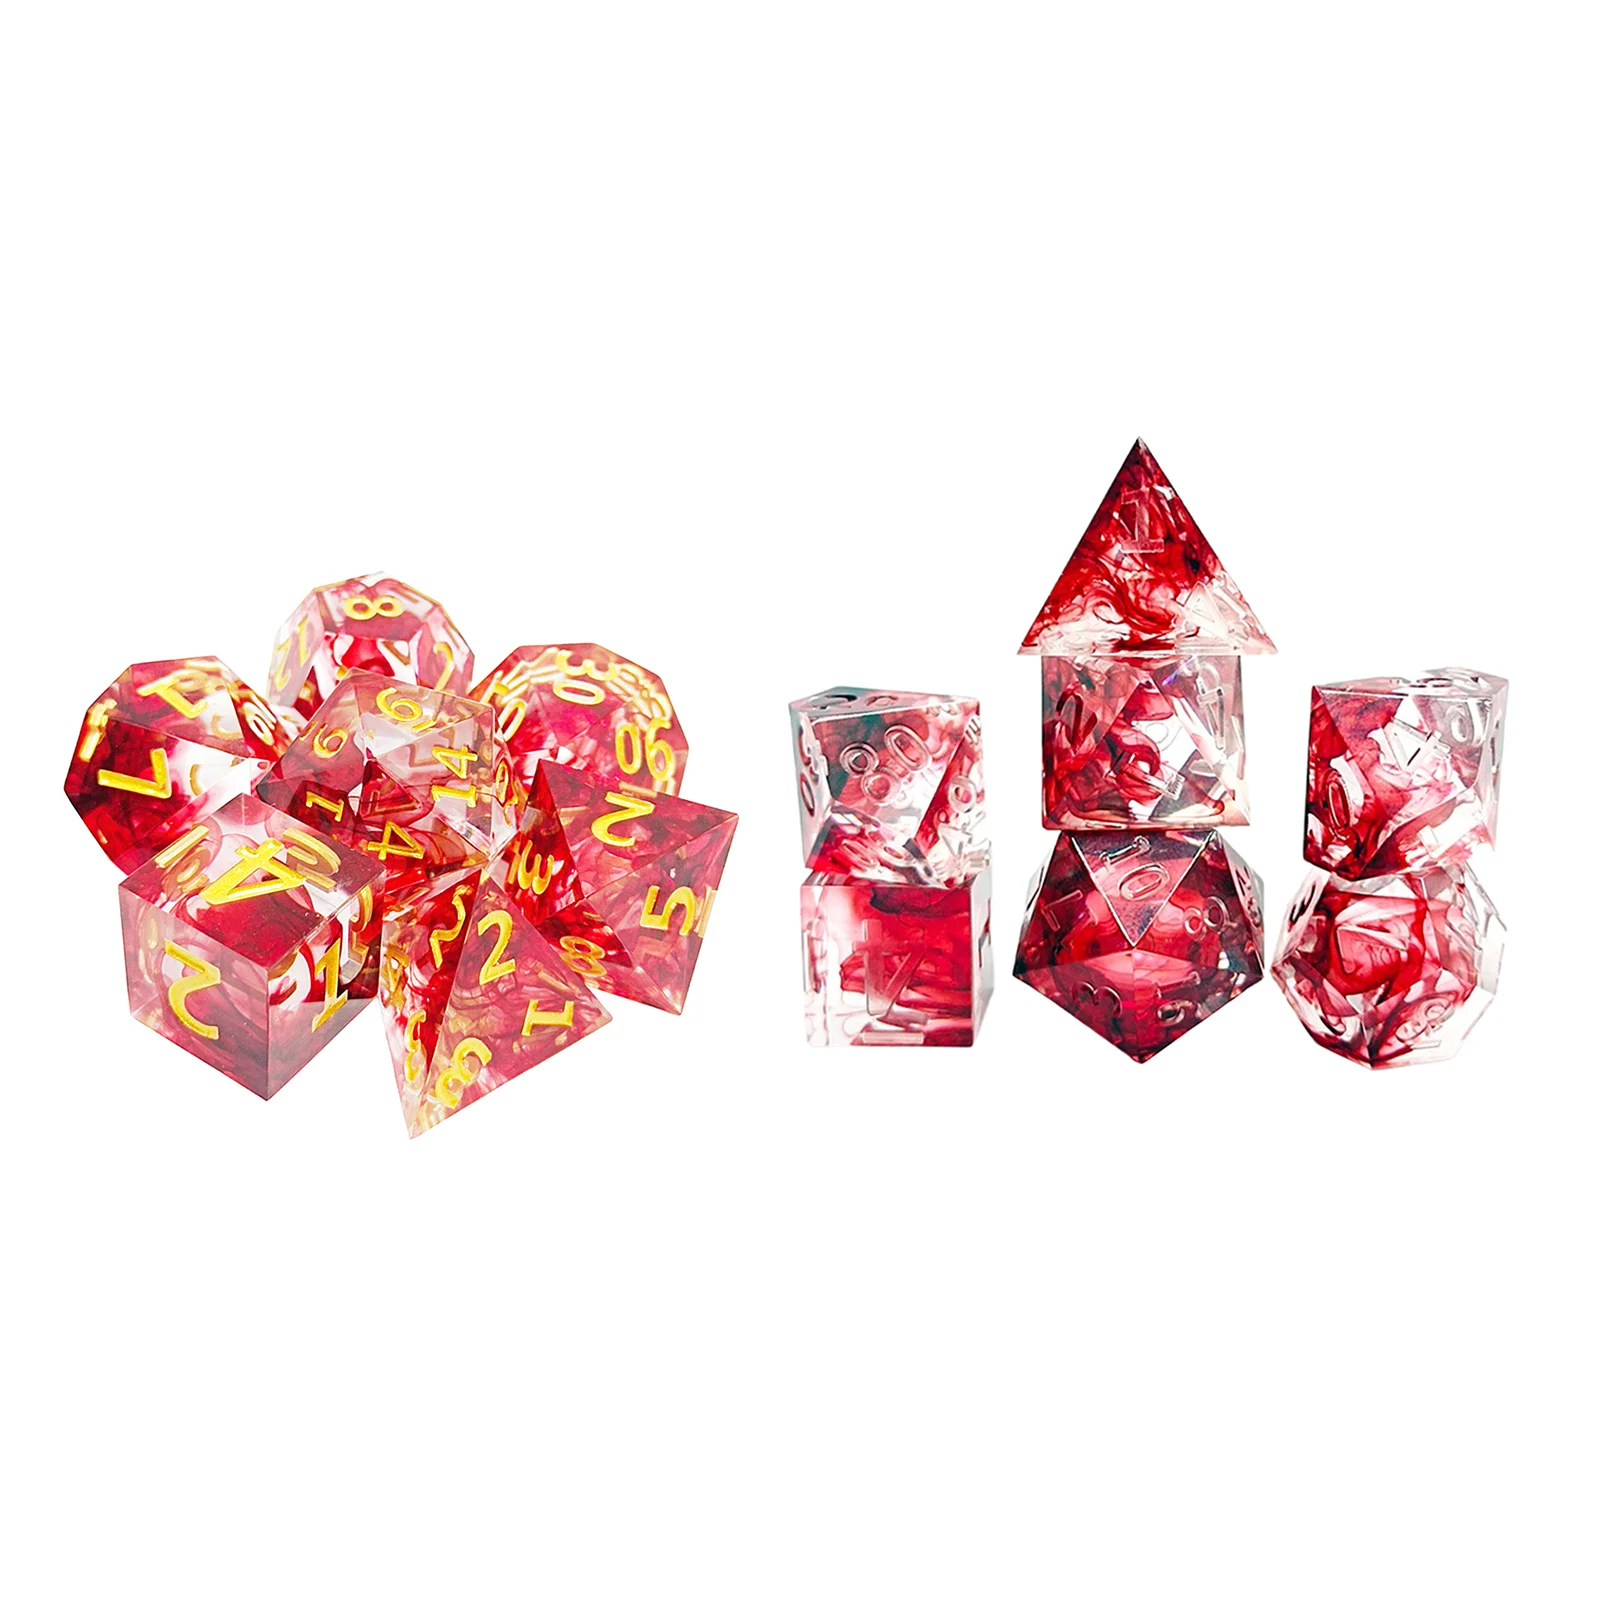 Pack of 7 Resin Polyhedral Dice RPG Blood Effect Acute Angle Red Floating Silk RPG Dices